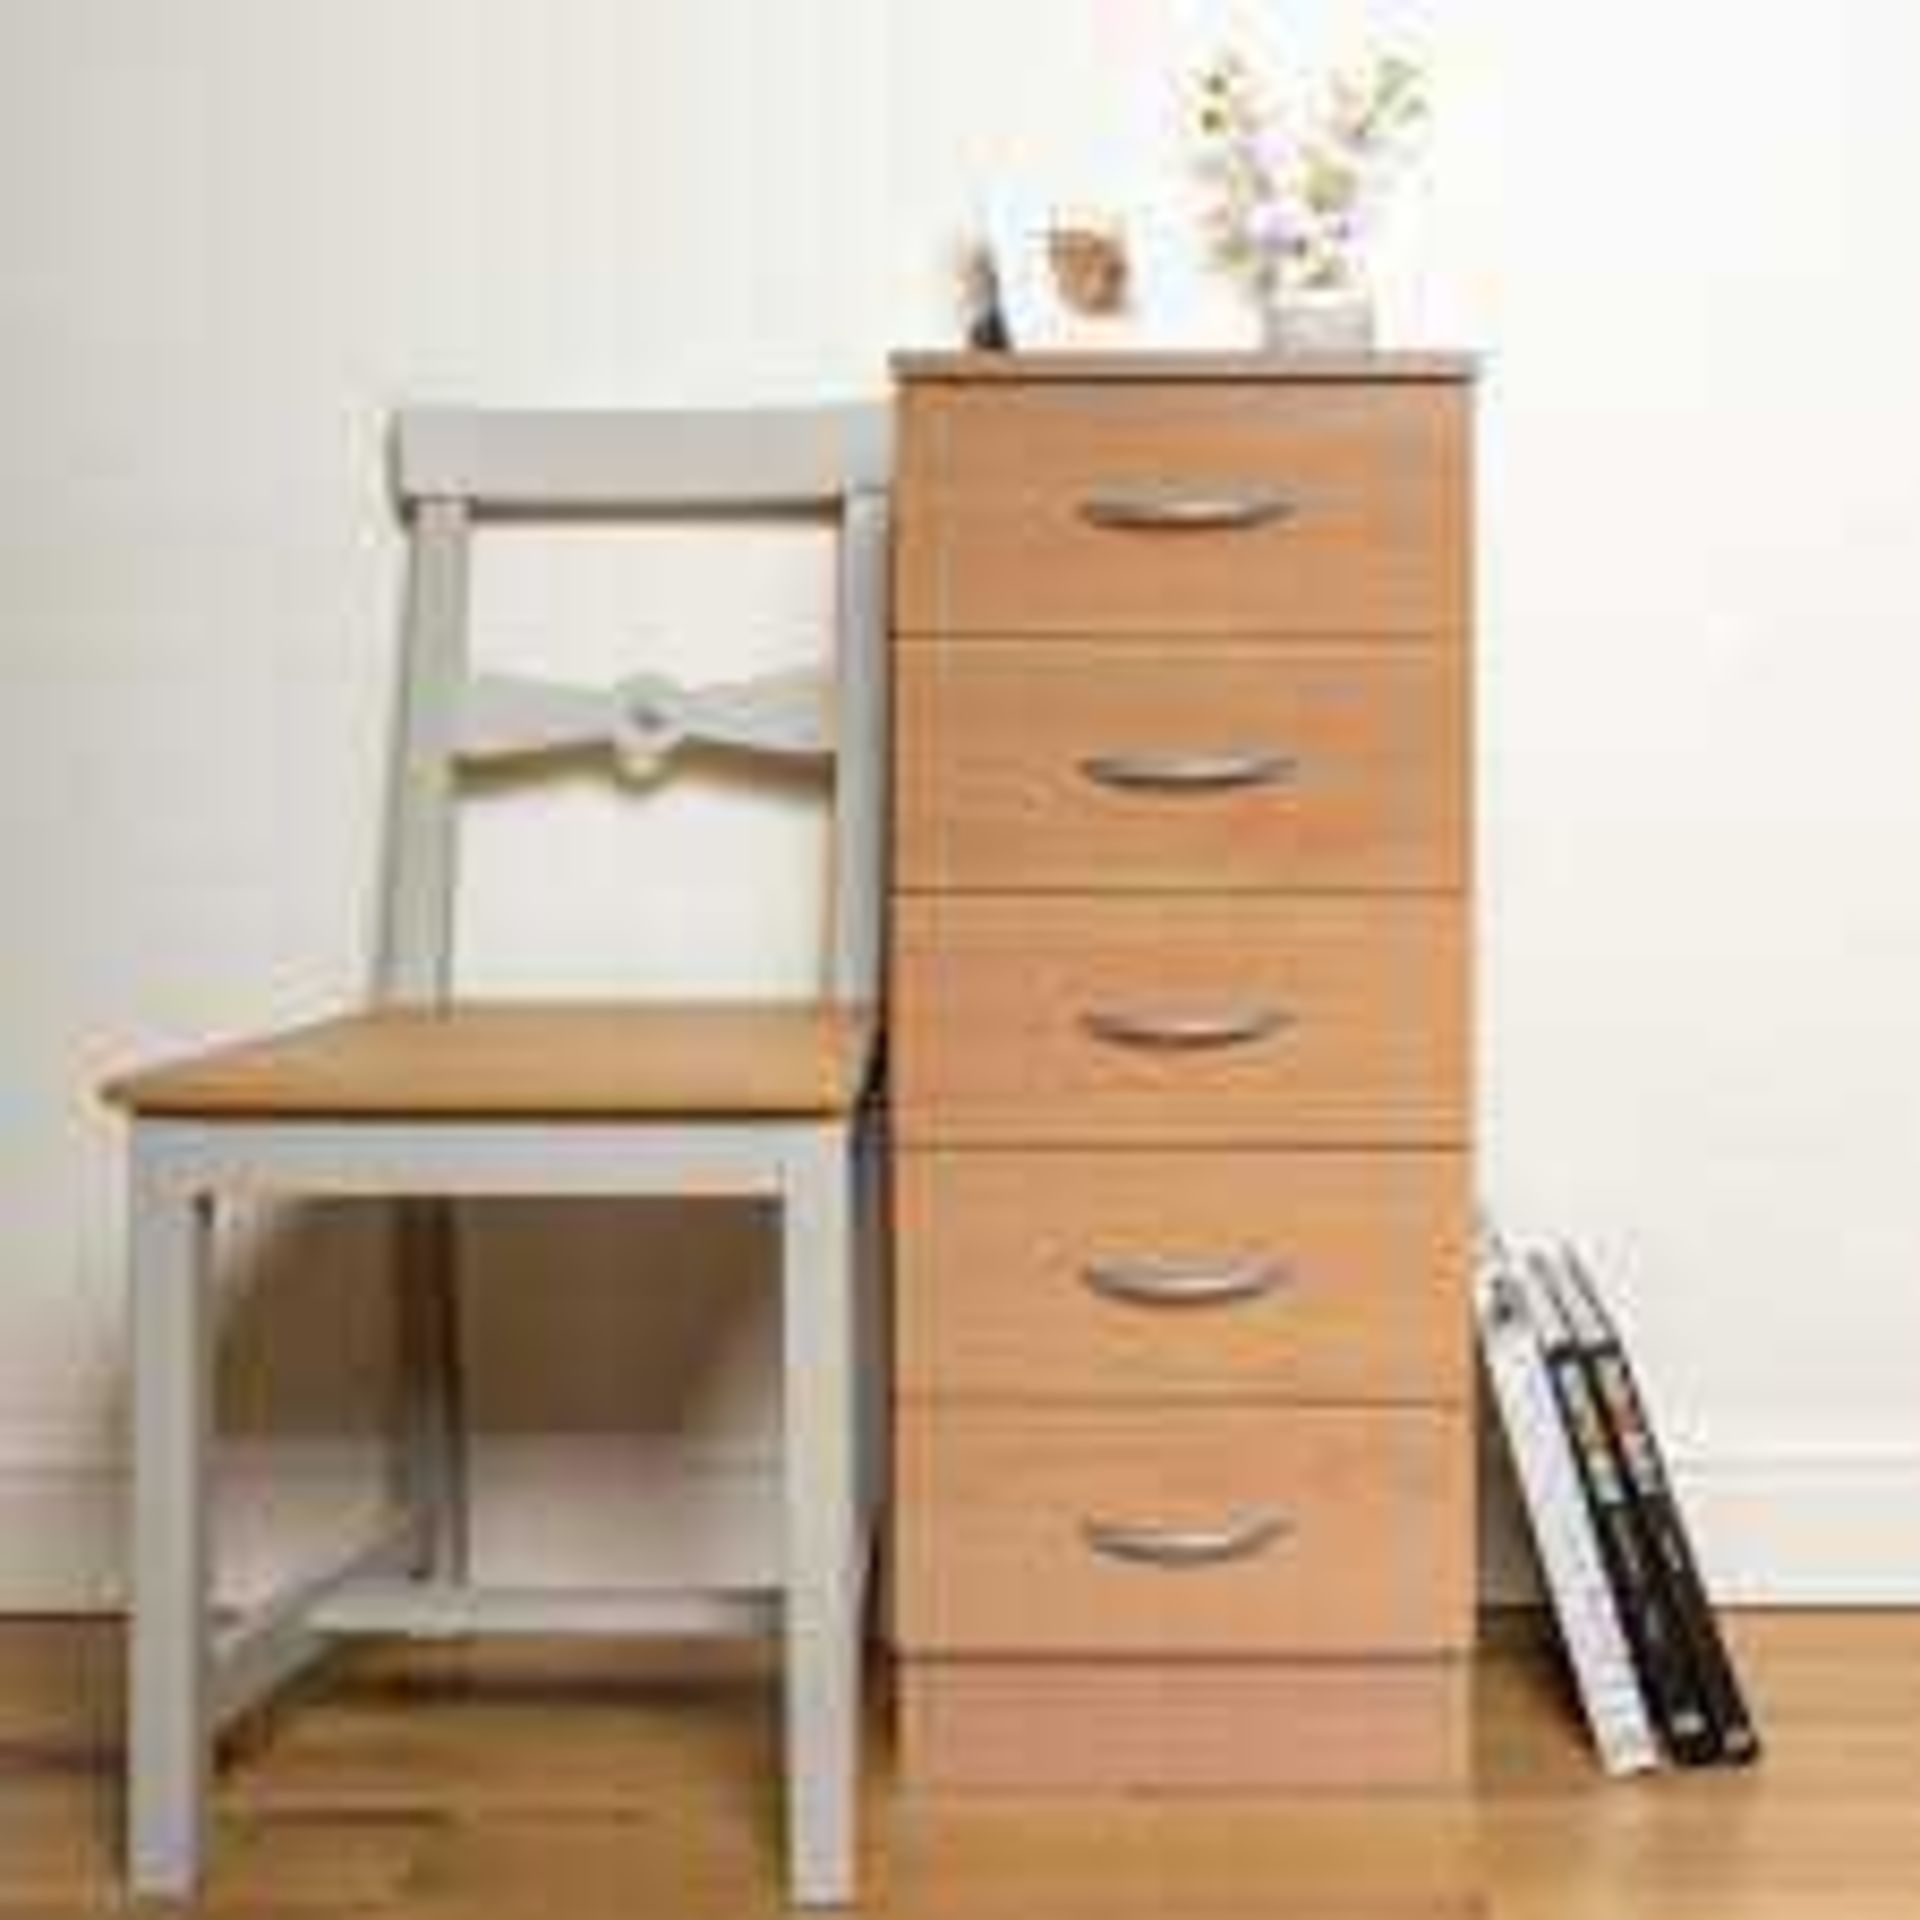 RRP £80. Boxed Chest Of 5 Drawers - Beech